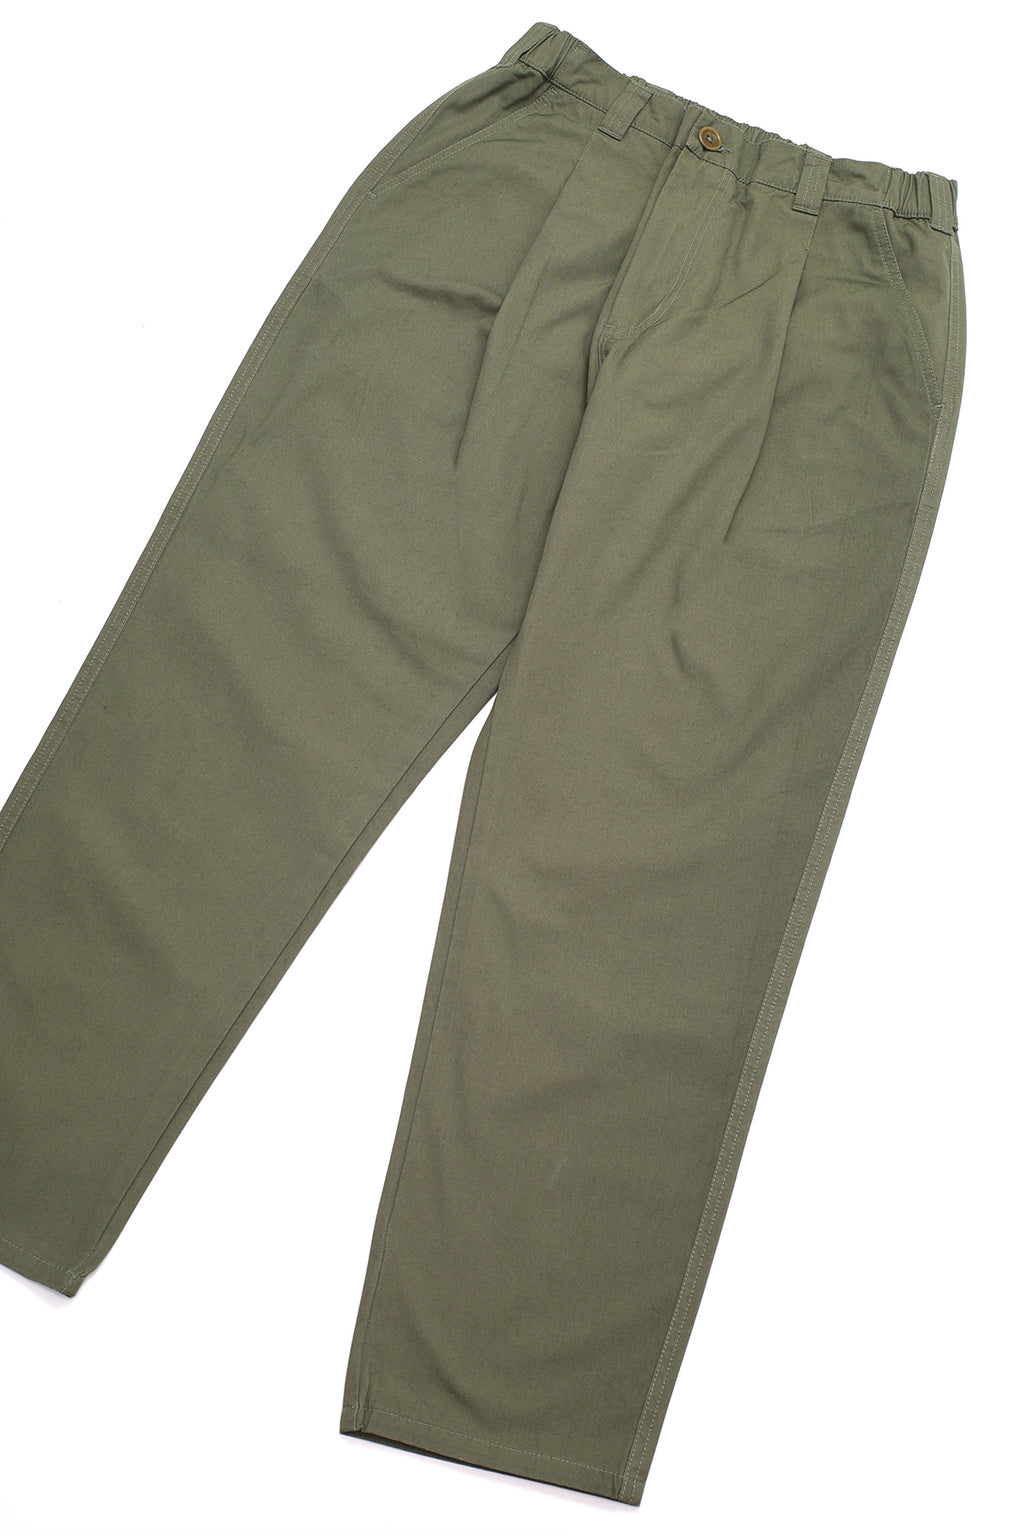 Service Works - Canvas Waiters Pant - Olive